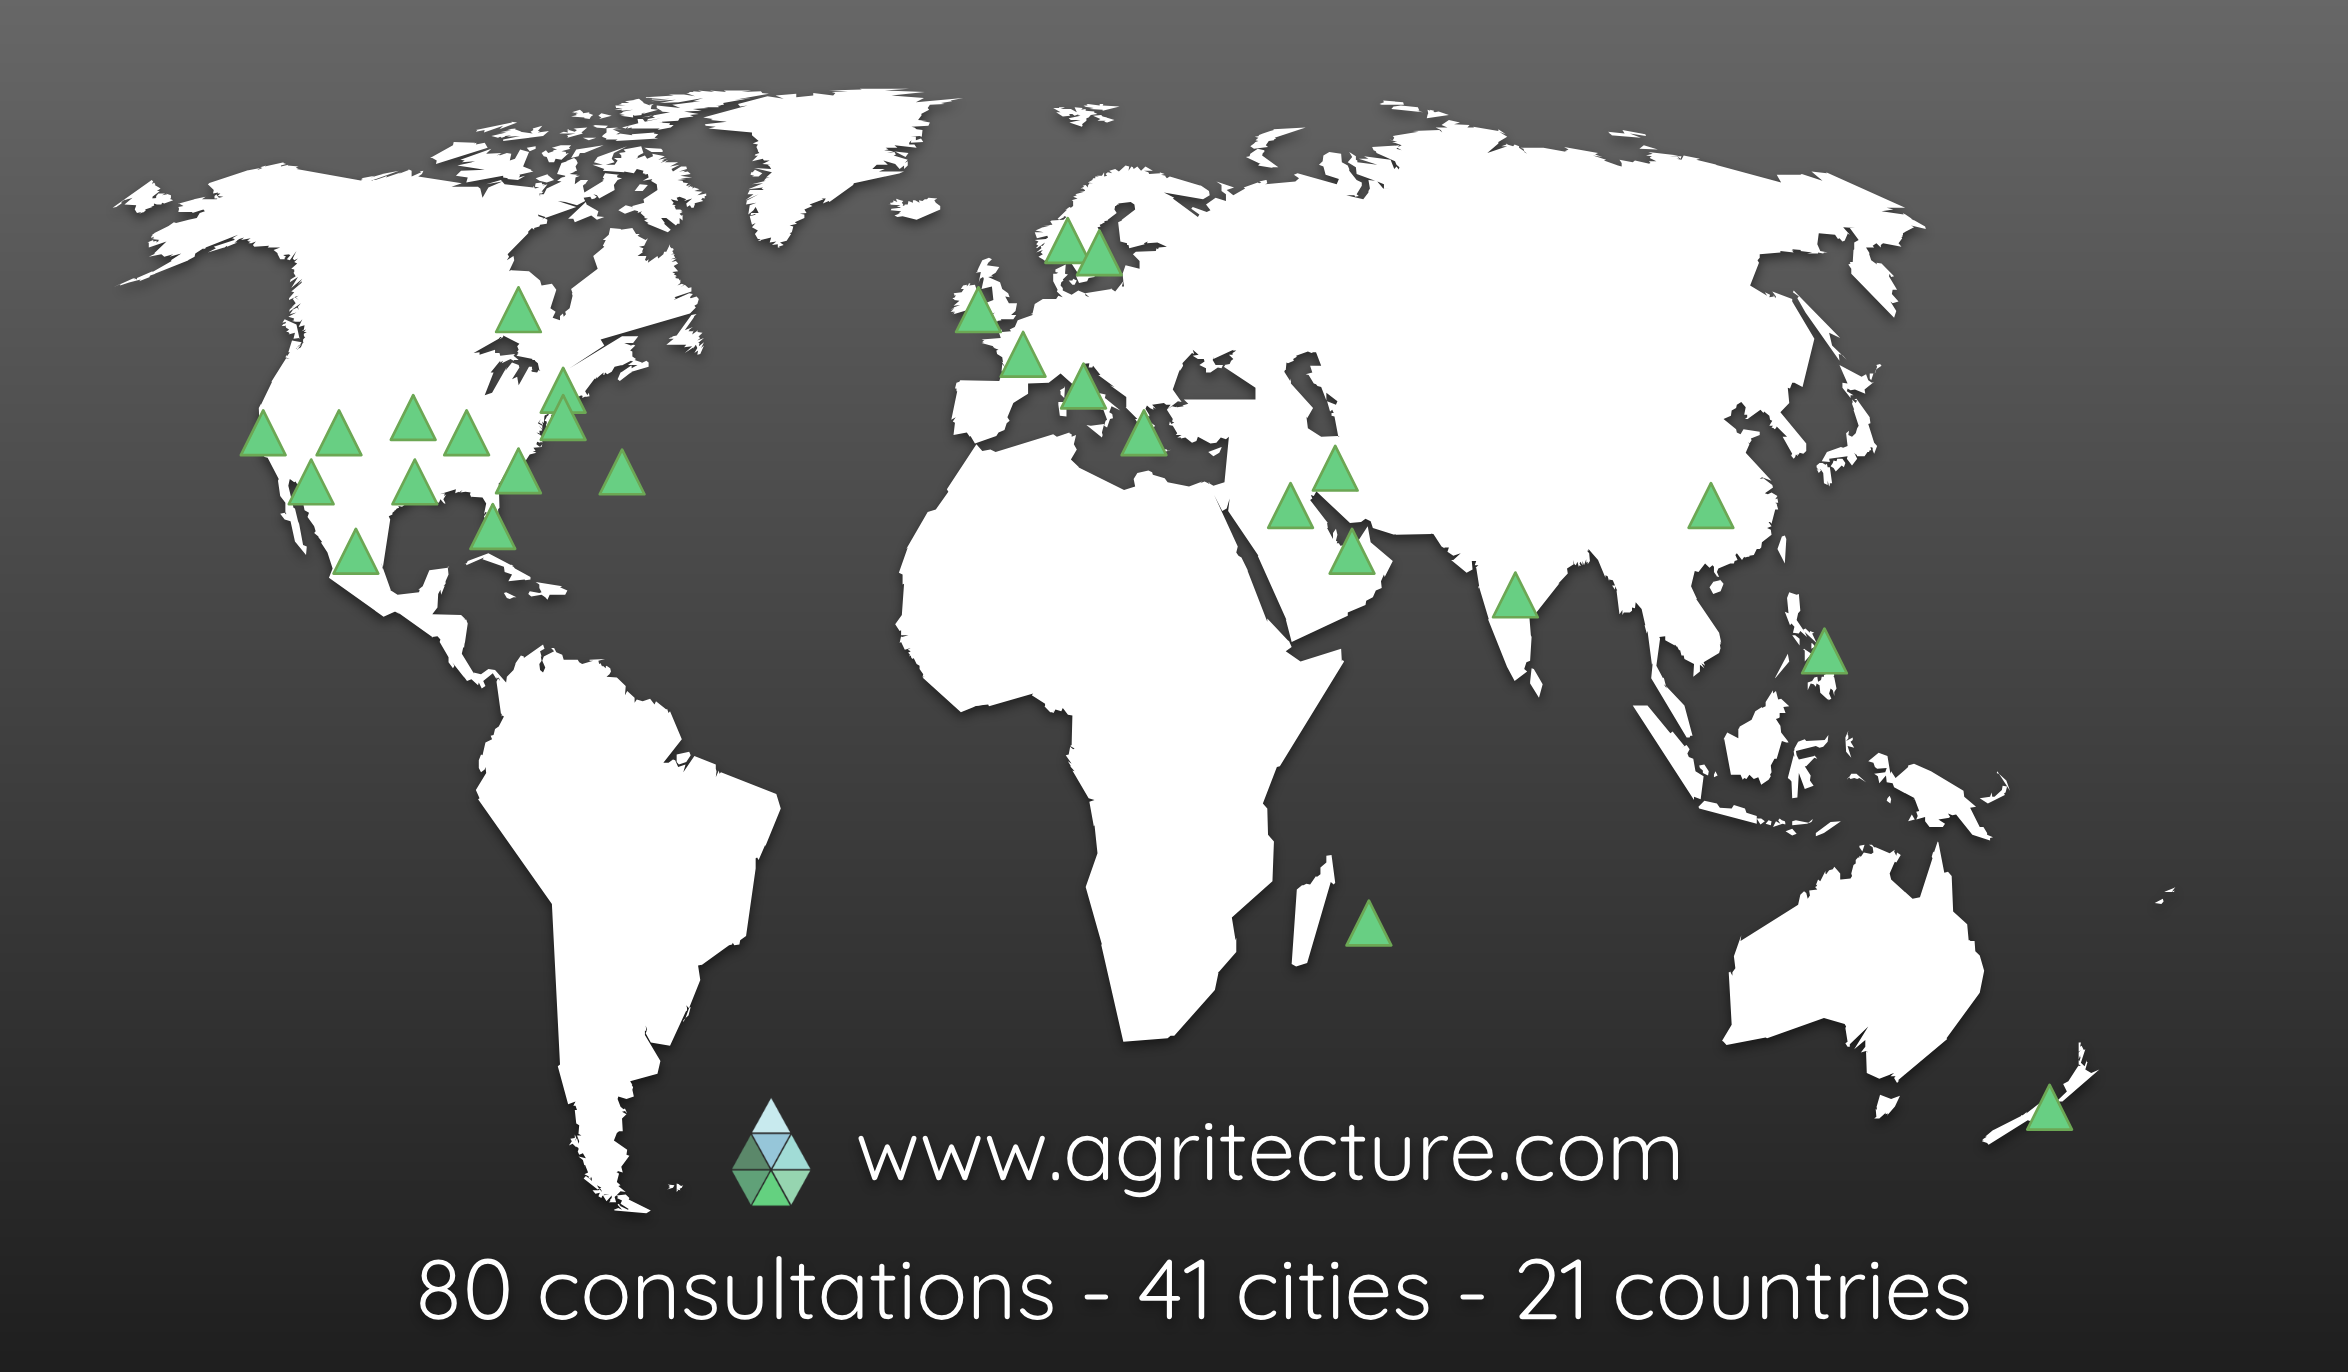 AgritectureConsultingGlobalUrbanAgricultureServices.jpg